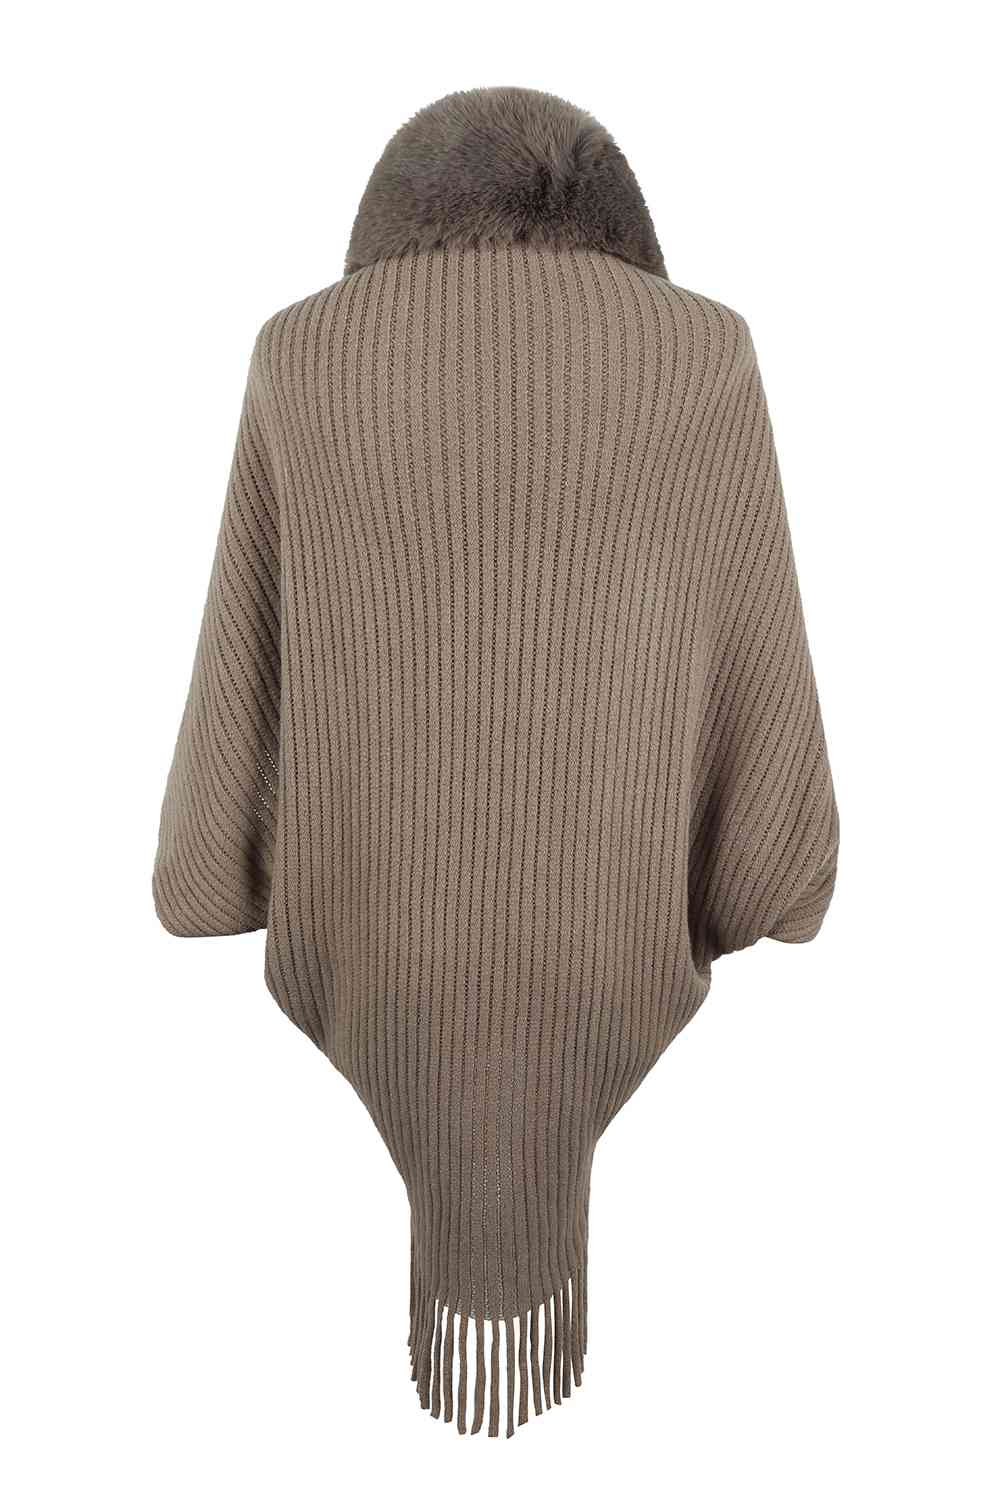 Back of chocolate open front poncho with fringe and faux fur trim